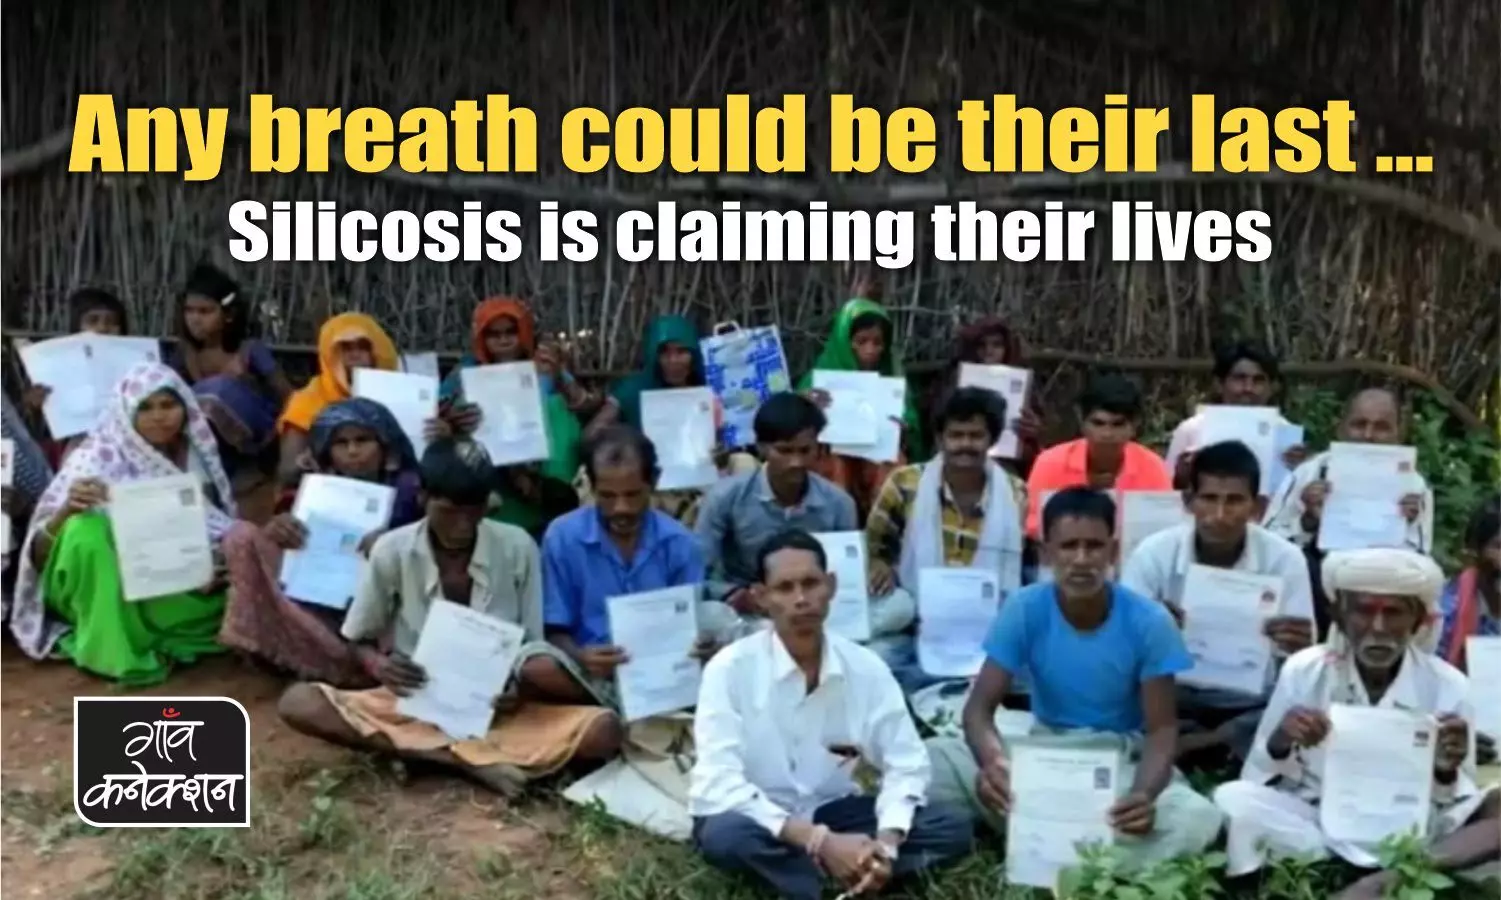 They left home in search of work, came back with silicosis